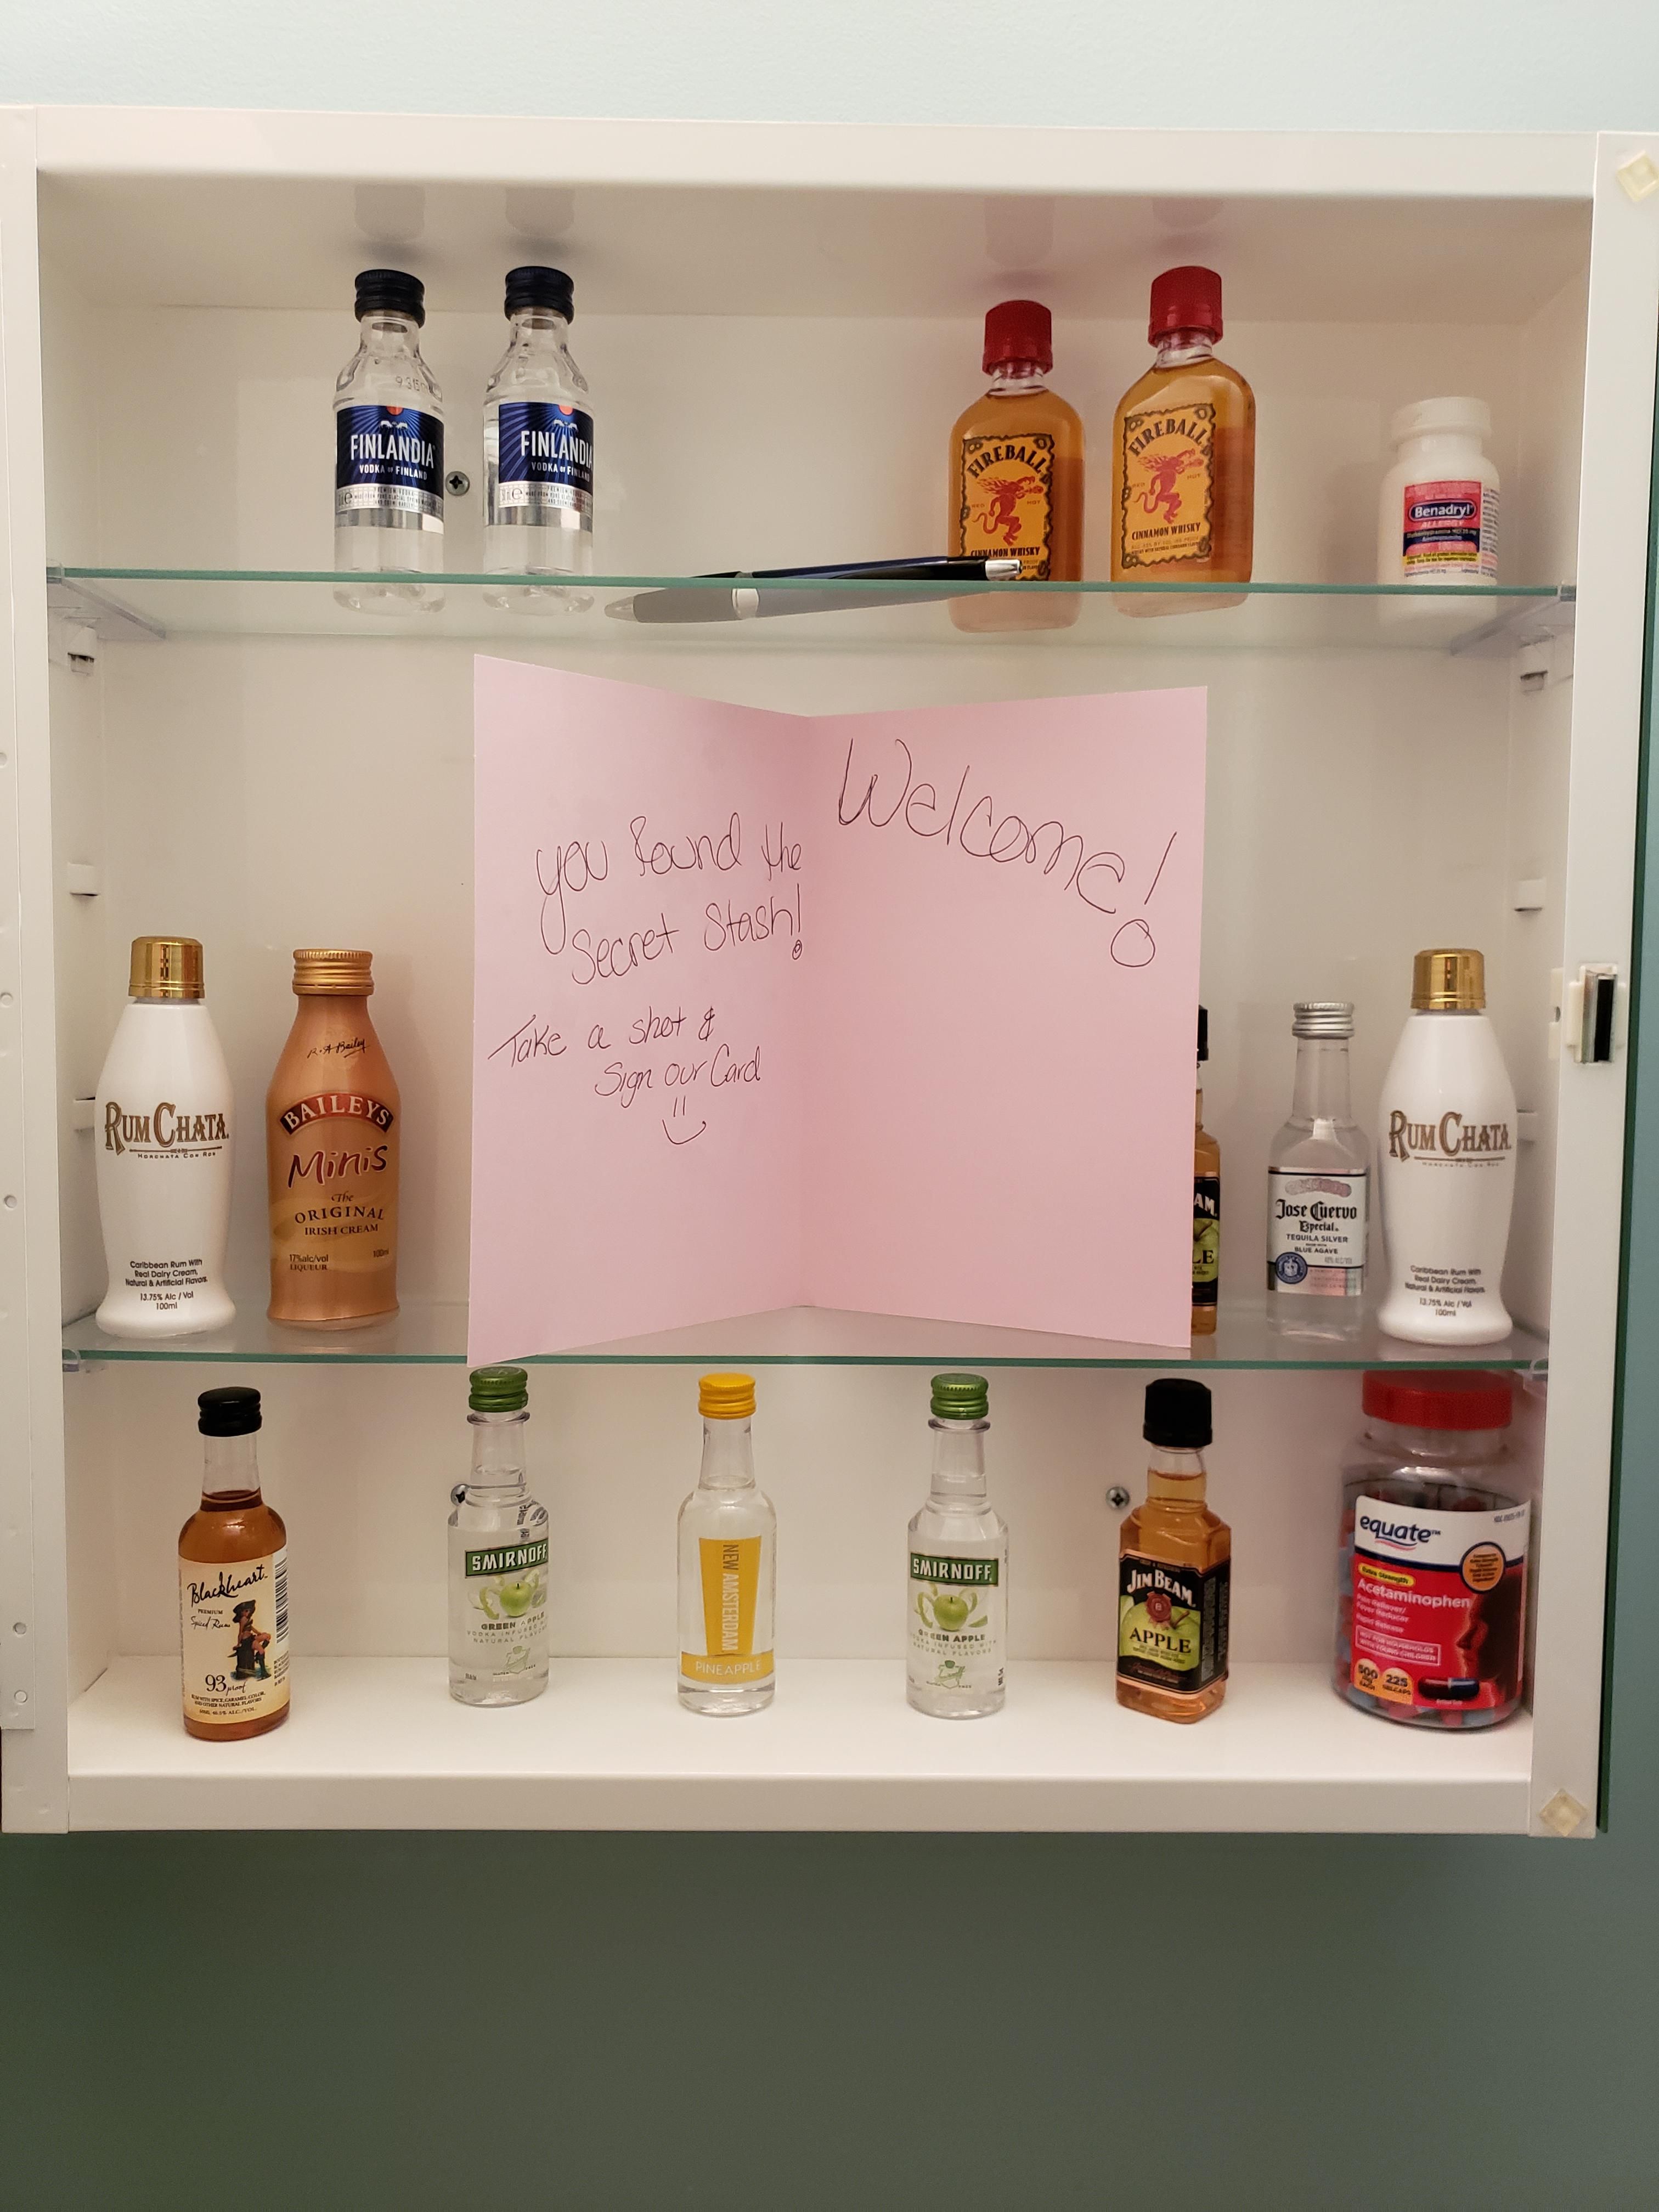 Great family and friends! No one snooped the medicine cabinet during our housewarming party.